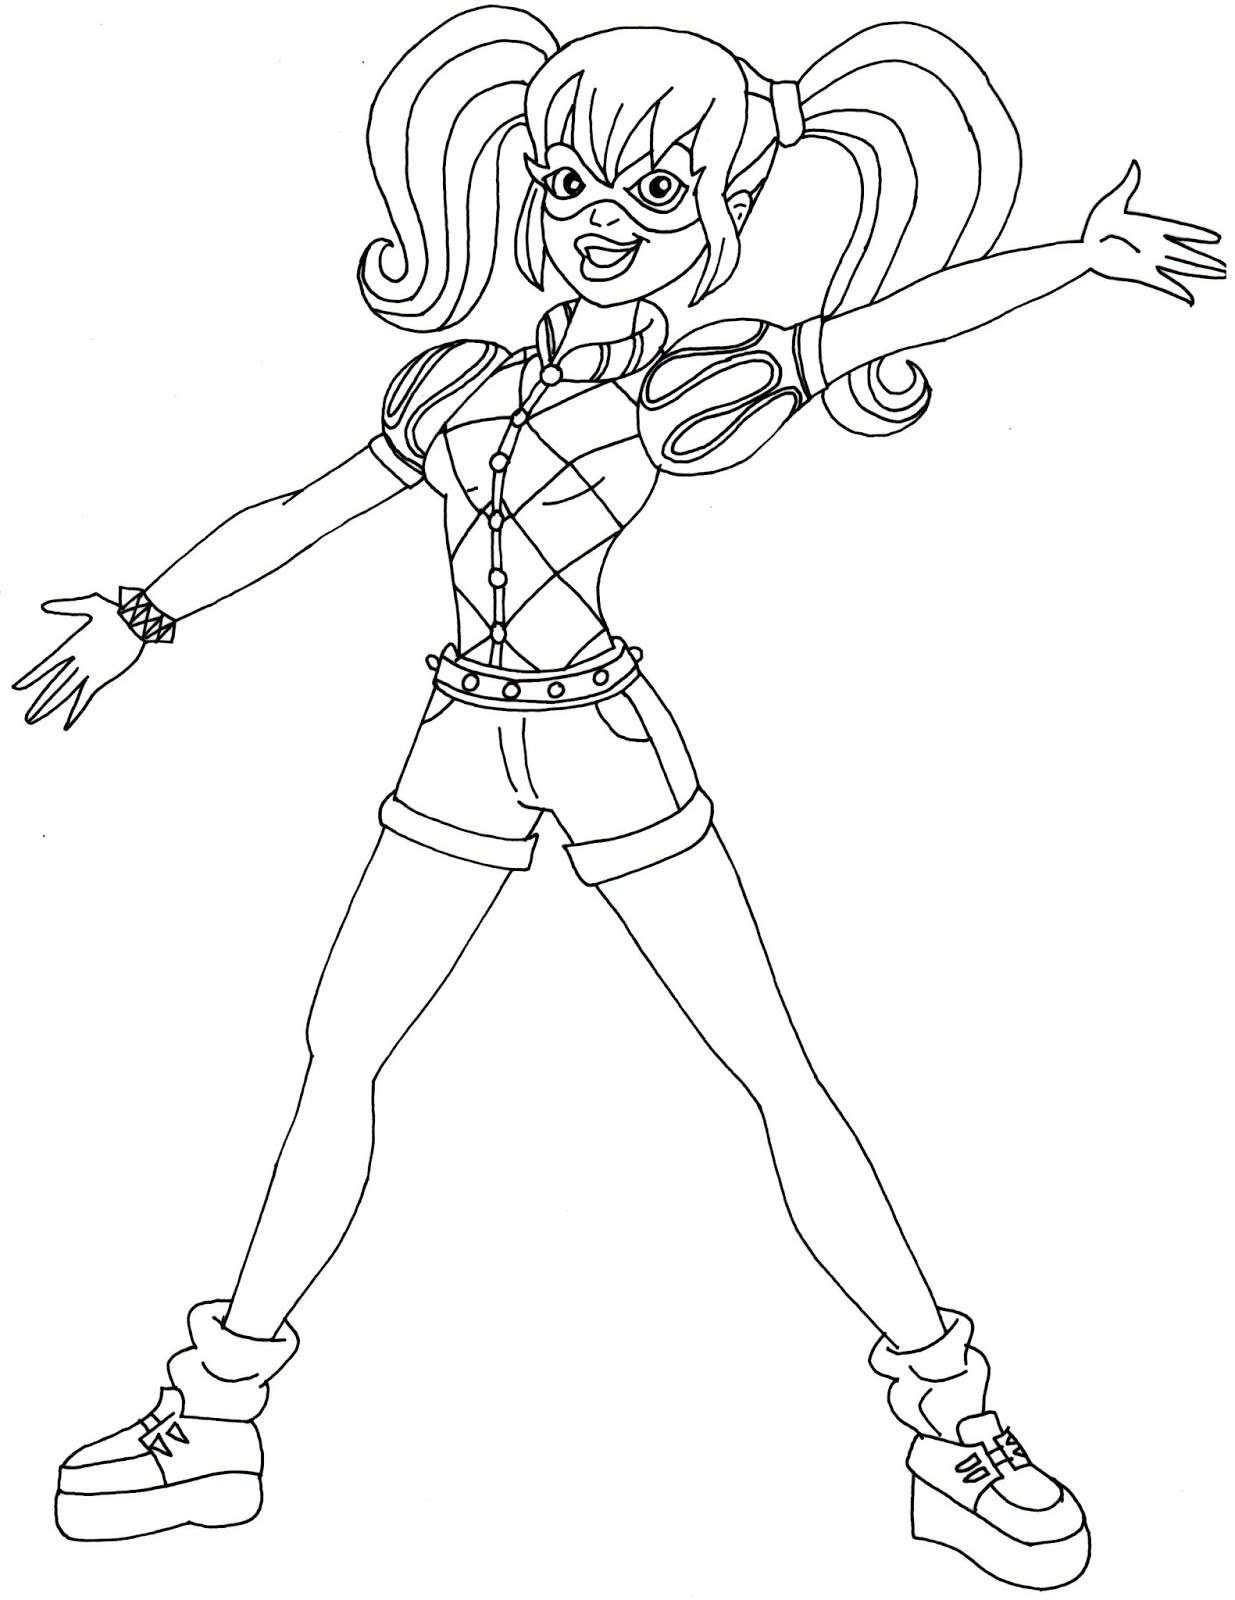 Harley Quinn Coloring Pages   Best Coloring Pages For Kids